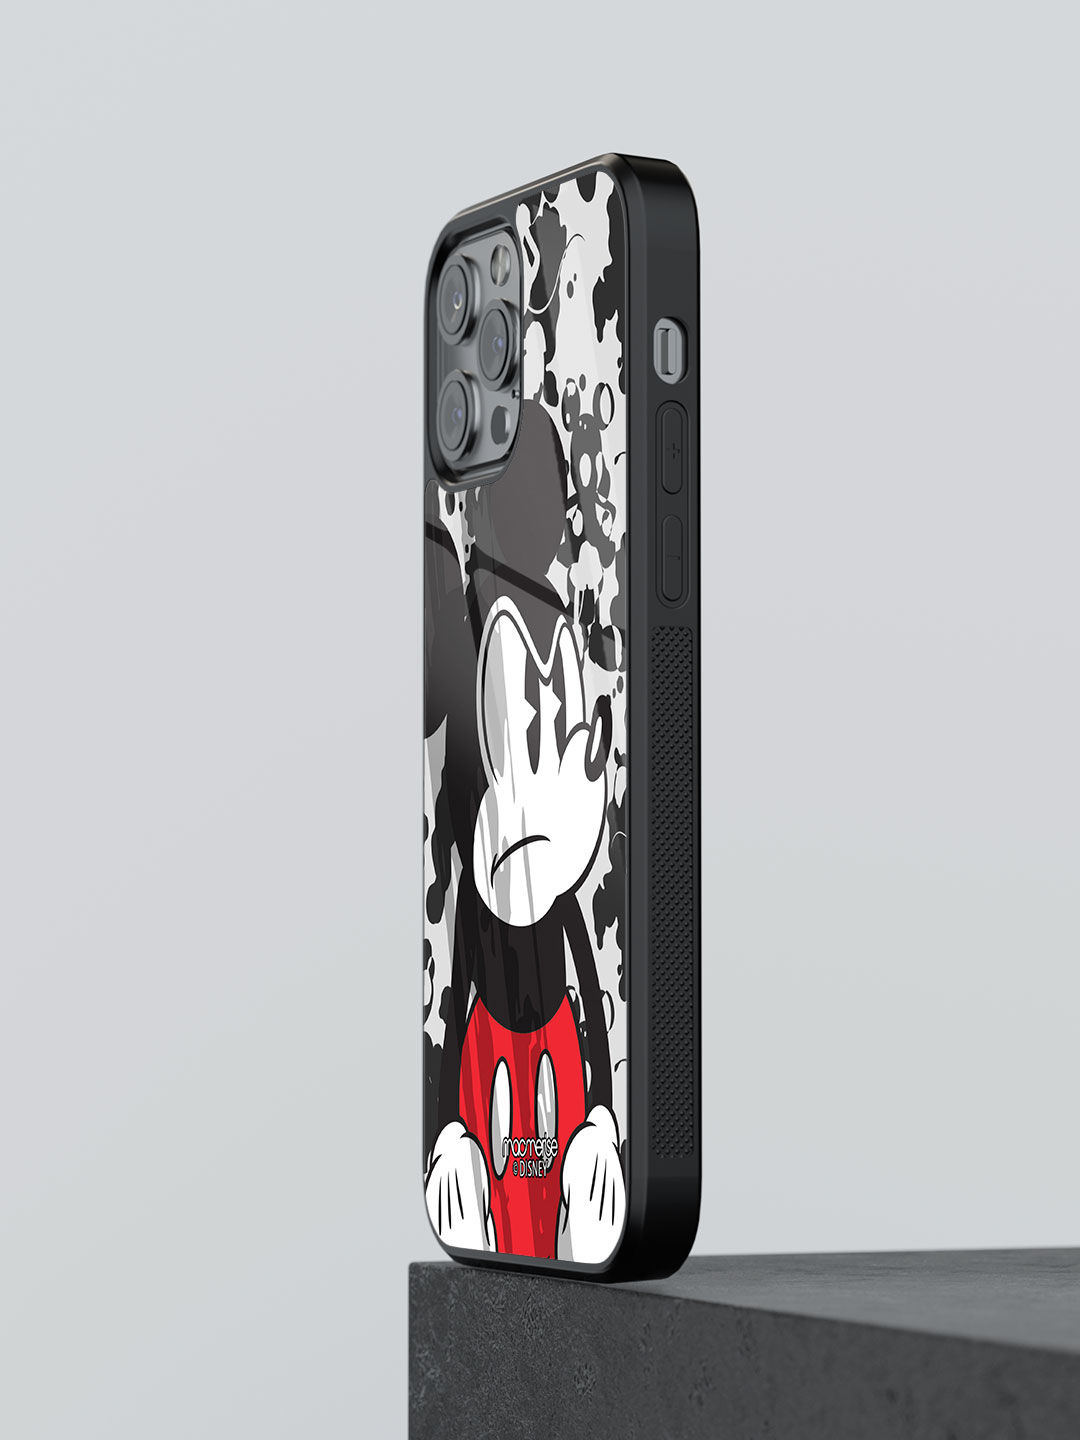 Grumpy Mickey - Glass Case For iPhone 13 Pro Max